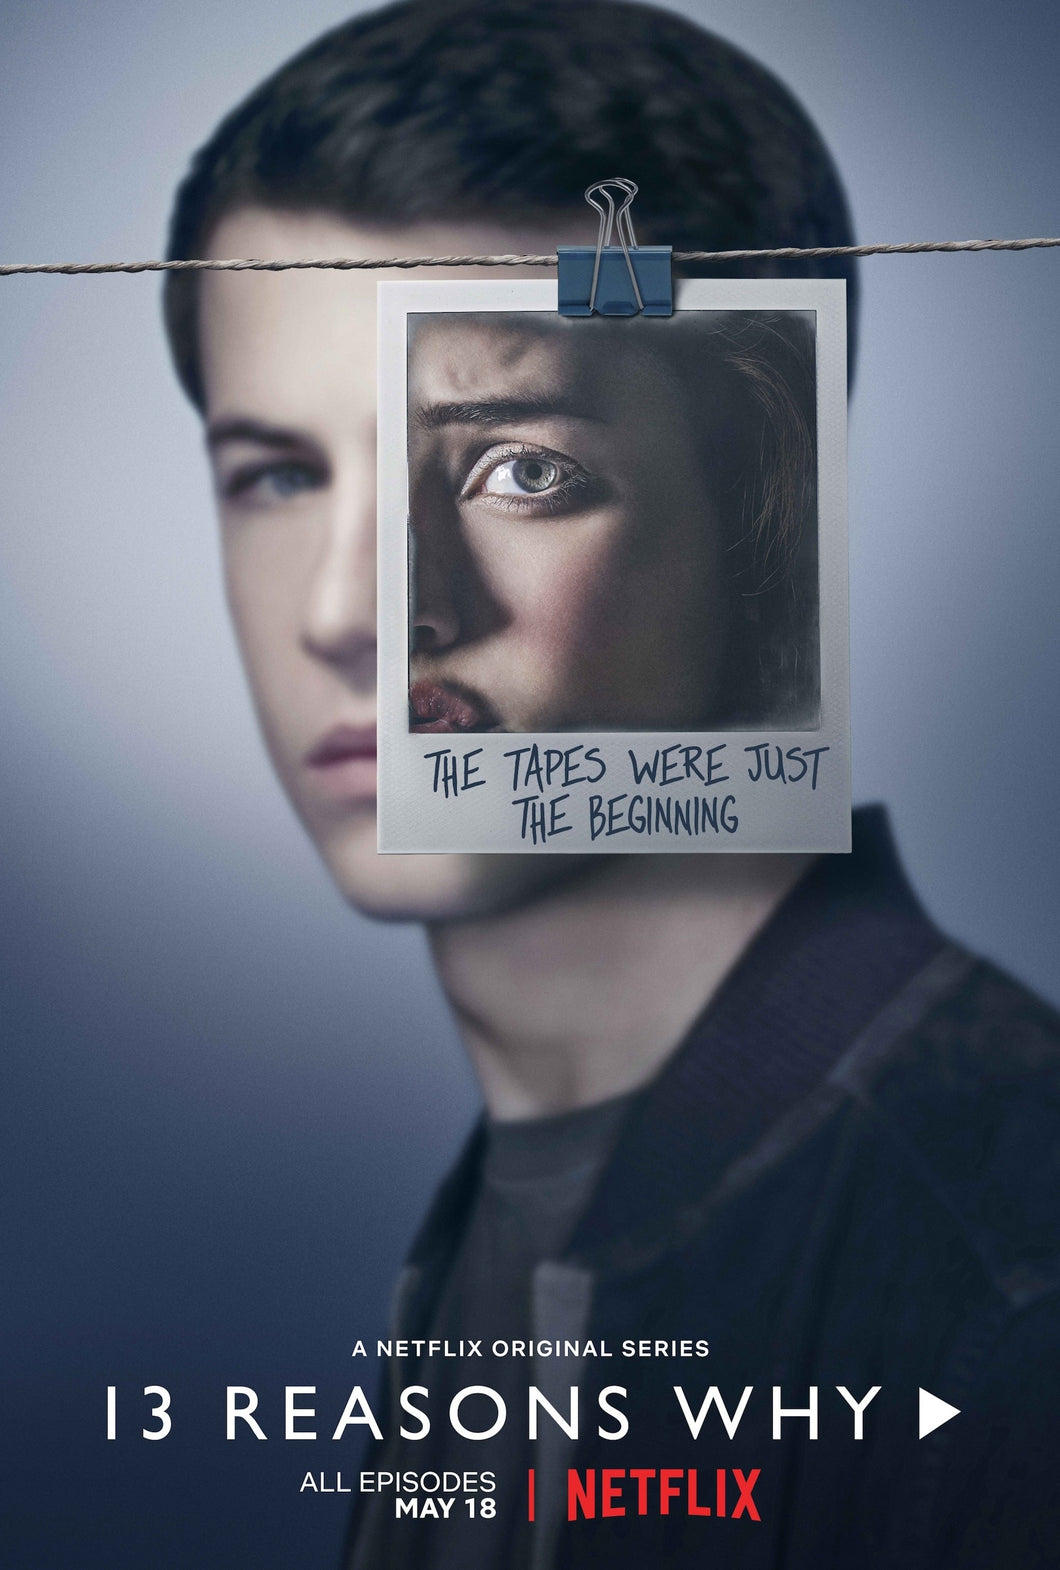 13 Reasons Why (2017)v4 TV Series High Quality Glossy Paper A1 A2 A3 A4 A3 Framed or Unframed!!!